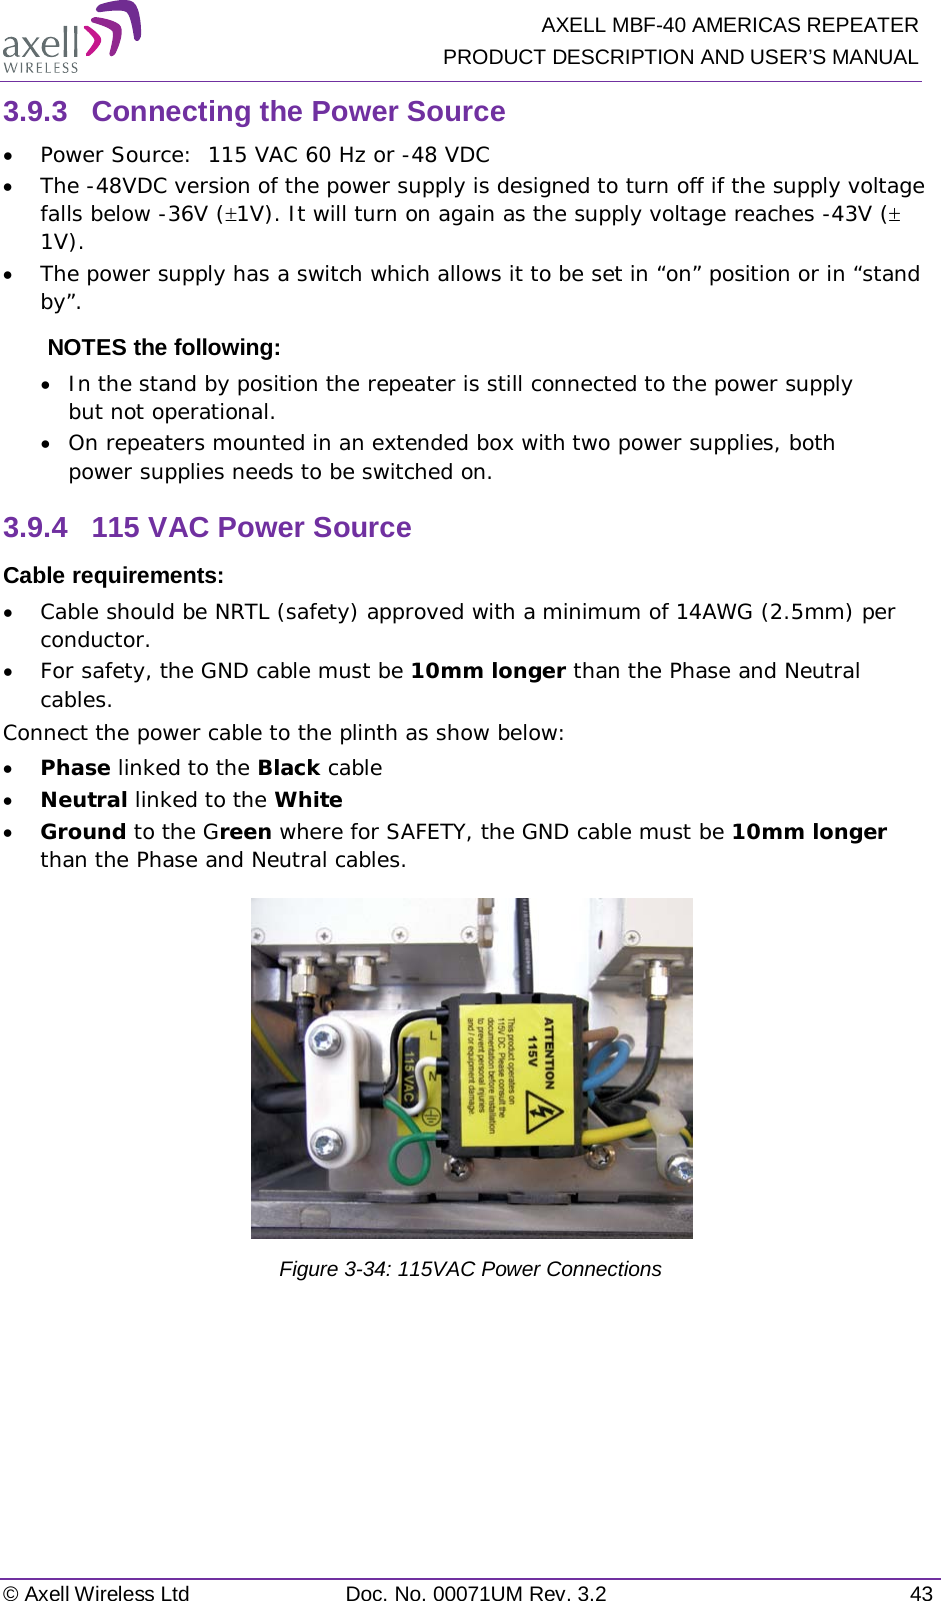   AXELL MBF-40 AMERICAS REPEATER PRODUCT DESCRIPTION AND USER’S MANUAL © Axell Wireless Ltd Doc. No. 00071UM Rev. 3.2 43 3.9.3  Connecting the Power Source • Power Source:  115 VAC 60 Hz or -48 VDC  • The -48VDC version of the power supply is designed to turn off if the supply voltage falls below -36V (±1V). It will turn on again as the supply voltage reaches -43V (± 1V).  • The power supply has a switch which allows it to be set in “on” position or in “stand by”. NOTES the following:  • In the stand by position the repeater is still connected to the power supply but not operational. • On repeaters mounted in an extended box with two power supplies, both power supplies needs to be switched on. 3.9.4  115 VAC Power Source Cable requirements:  • Cable should be NRTL (safety) approved with a minimum of 14AWG (2.5mm) per conductor. • For safety, the GND cable must be 10mm longer than the Phase and Neutral cables. Connect the power cable to the plinth as show below: • Phase linked to the Black cable • Neutral linked to the White • Ground to the Green where for SAFETY, the GND cable must be 10mm longer than the Phase and Neutral cables.  Figure  3-34: 115VAC Power Connections    